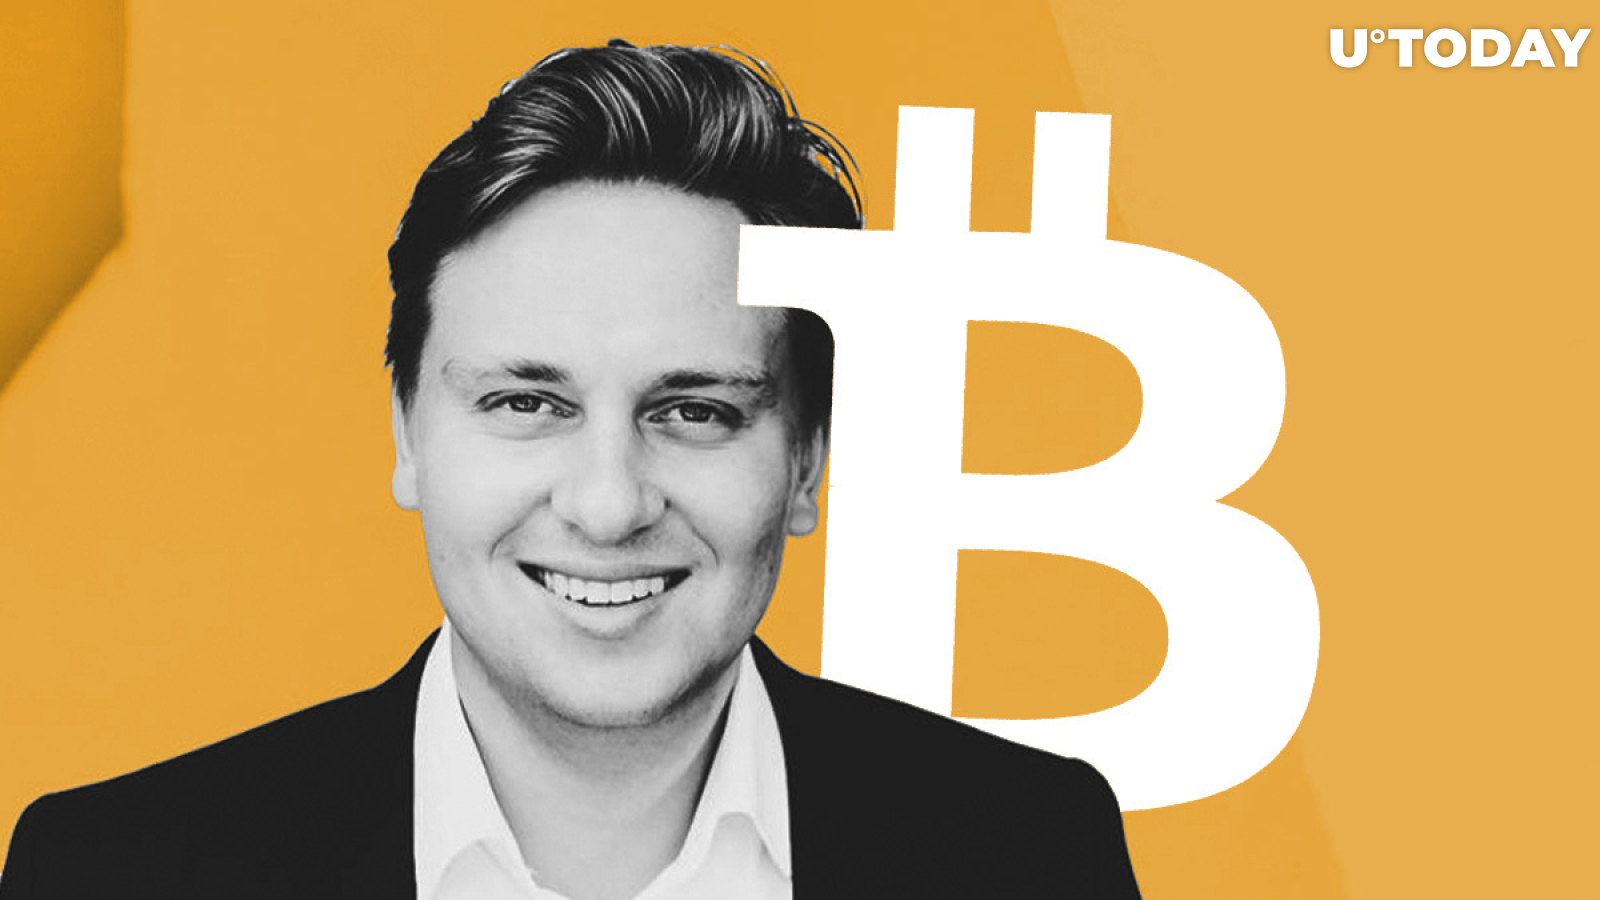 Bitcoin (BTC), Toilet Paper Are Hard Assets People Want Right Now: Blockfyre Founder